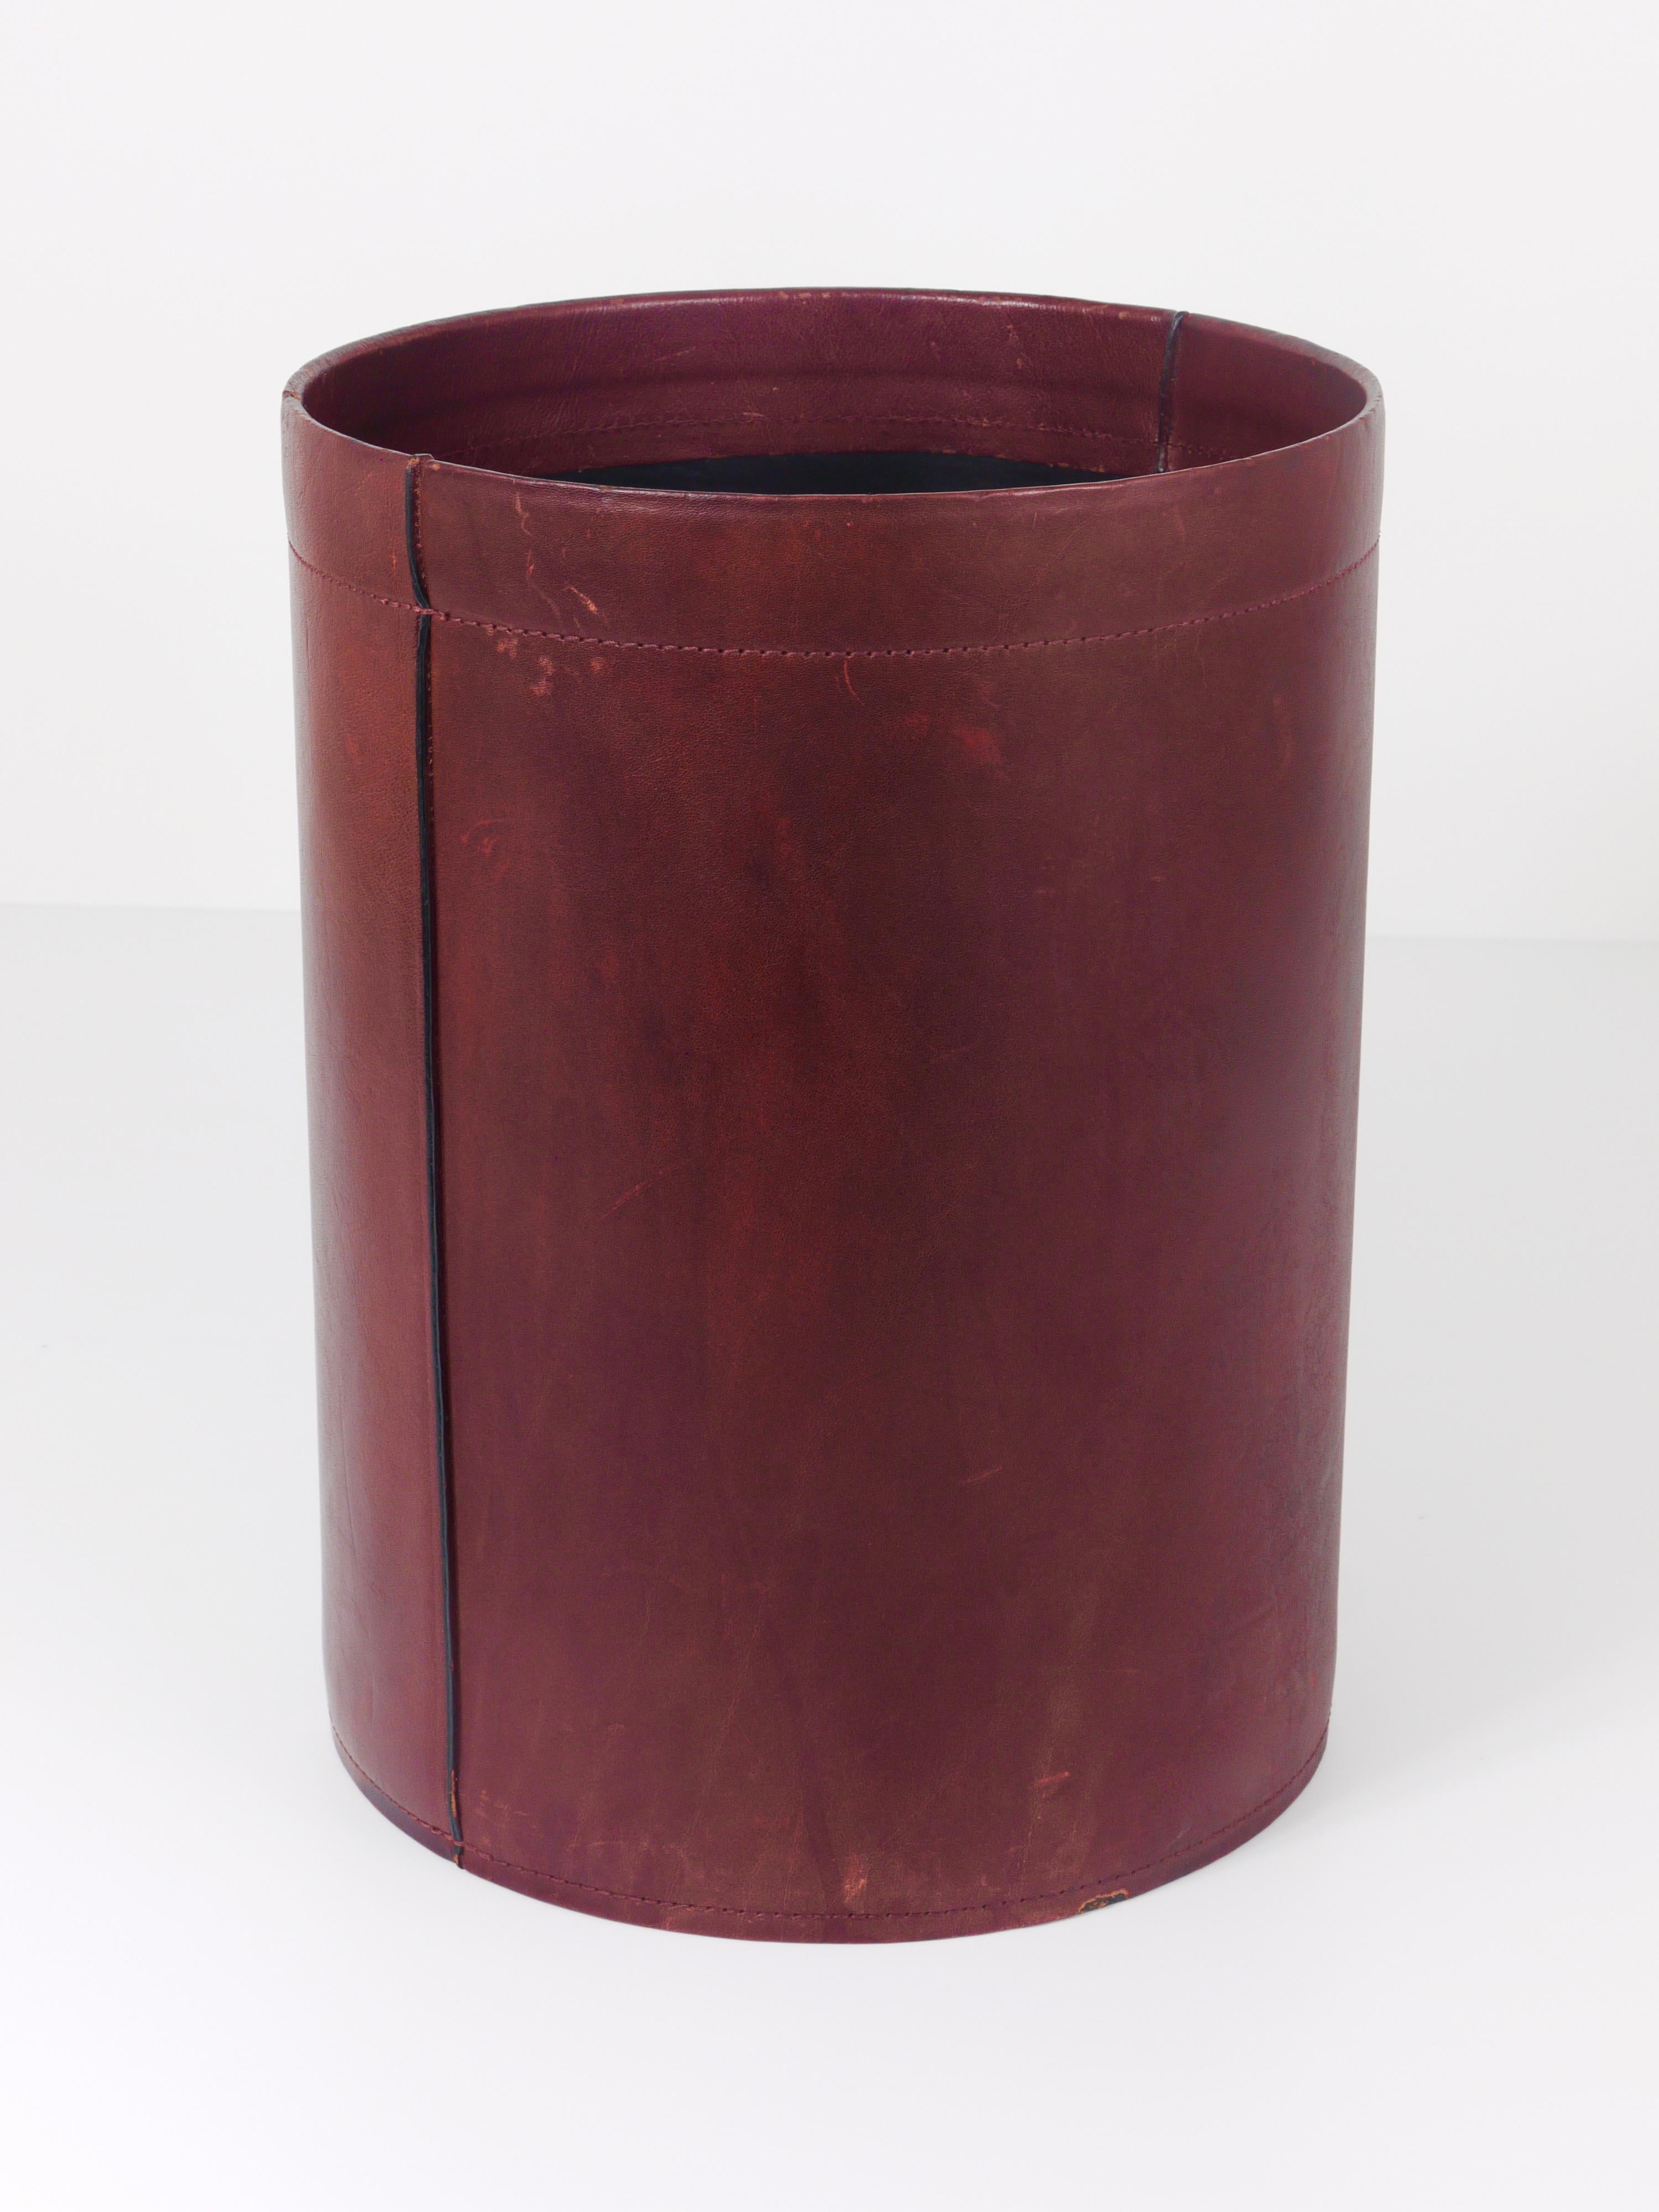 Mid-Century Modern Jacques Adnet Style Red Brown Leather Wastepaper Basket Bin, France, 1970s